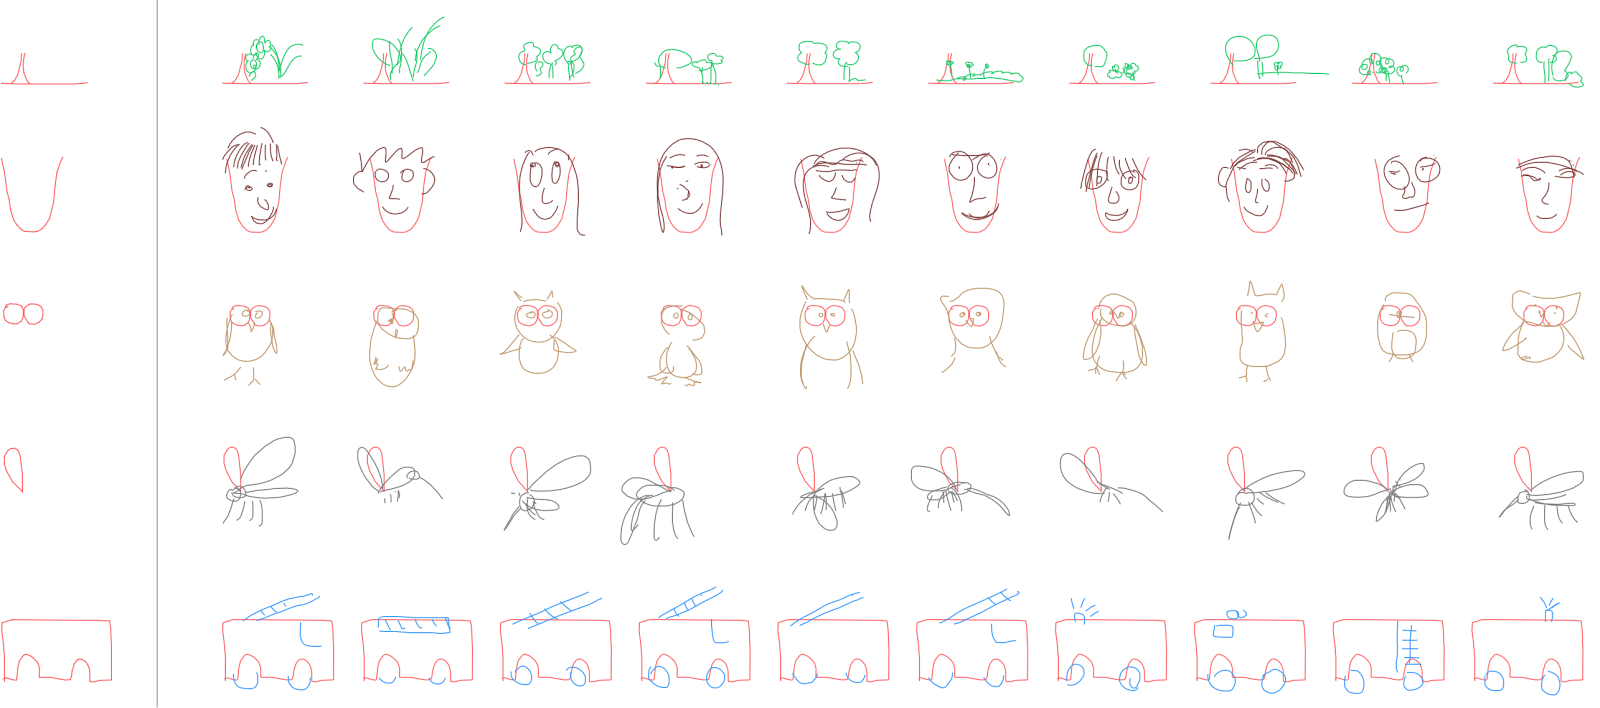 Sketch-RNN can finish incomplete drawings started by humans (left column)